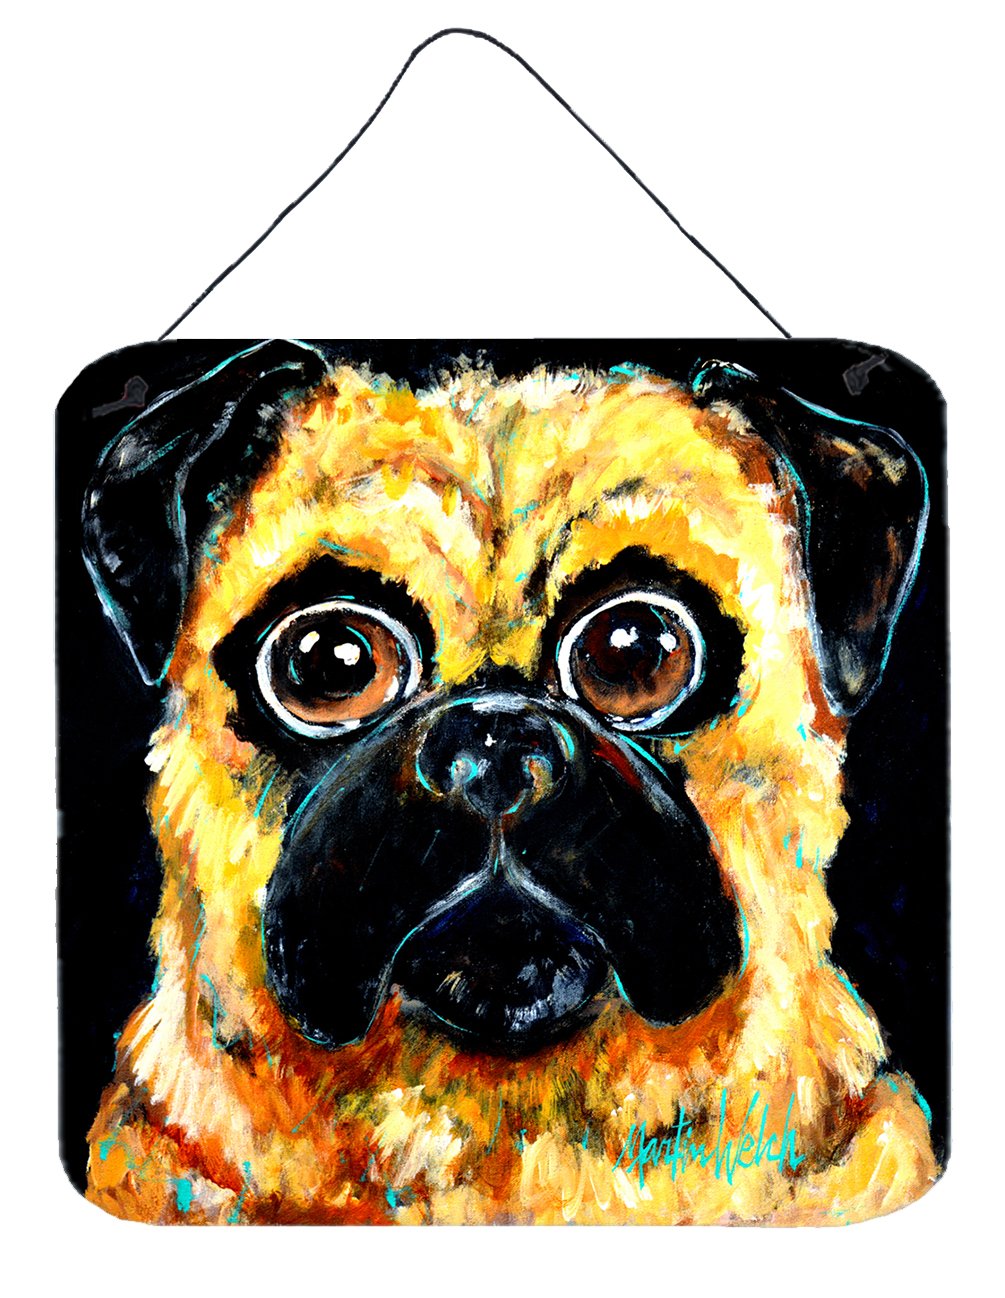 Pug It Out Wall or Door Hanging Prints MW1346DS66 by Caroline's Treasures